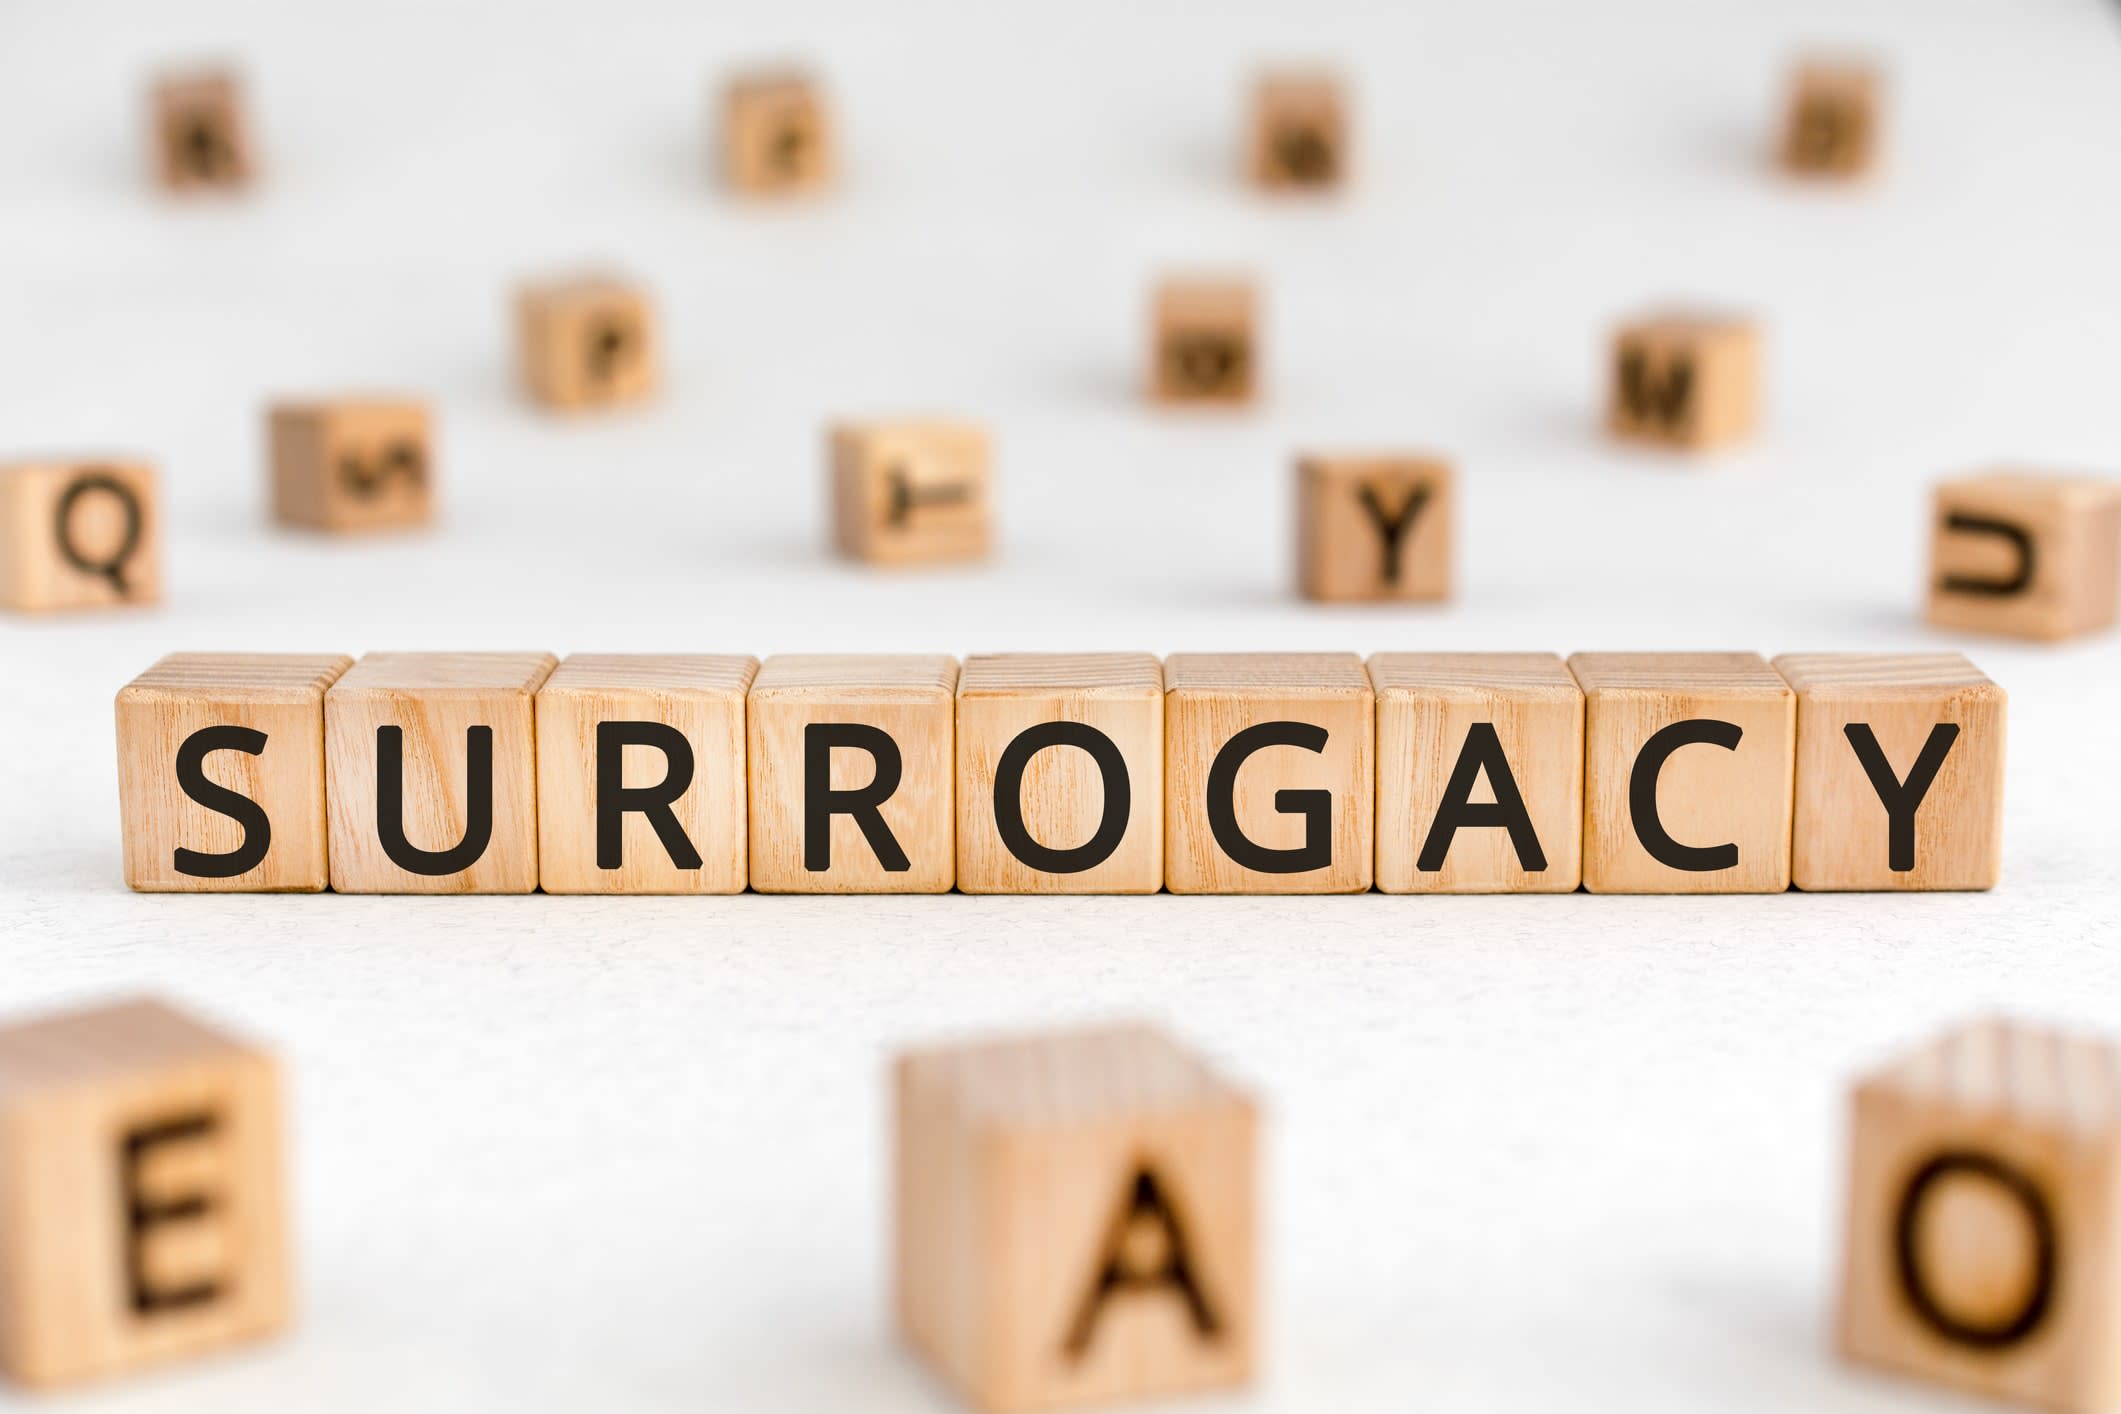 The word 'Surrogacy' spelt out in wooden blocks